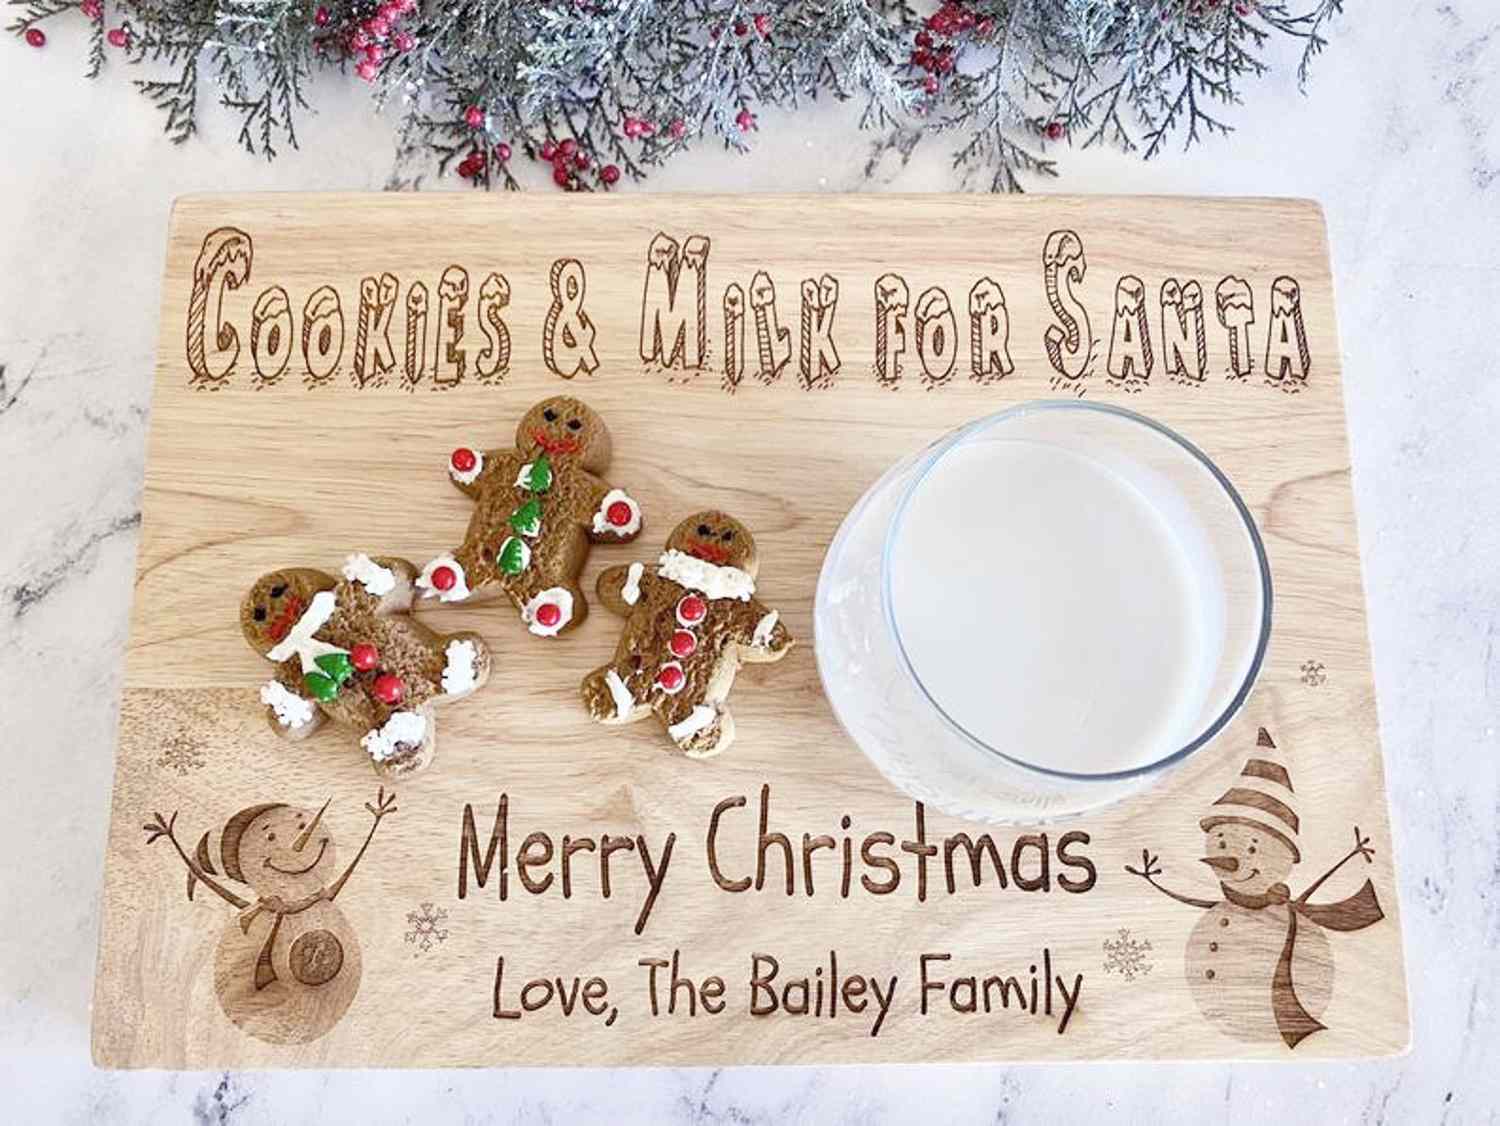 Perfect Christmas Craft Includes Plate Pearhead Holiday Cookies for Santa Plate Set Jug and Notepad to Leave Cookies and Milk for Santa on Christmas Eve 